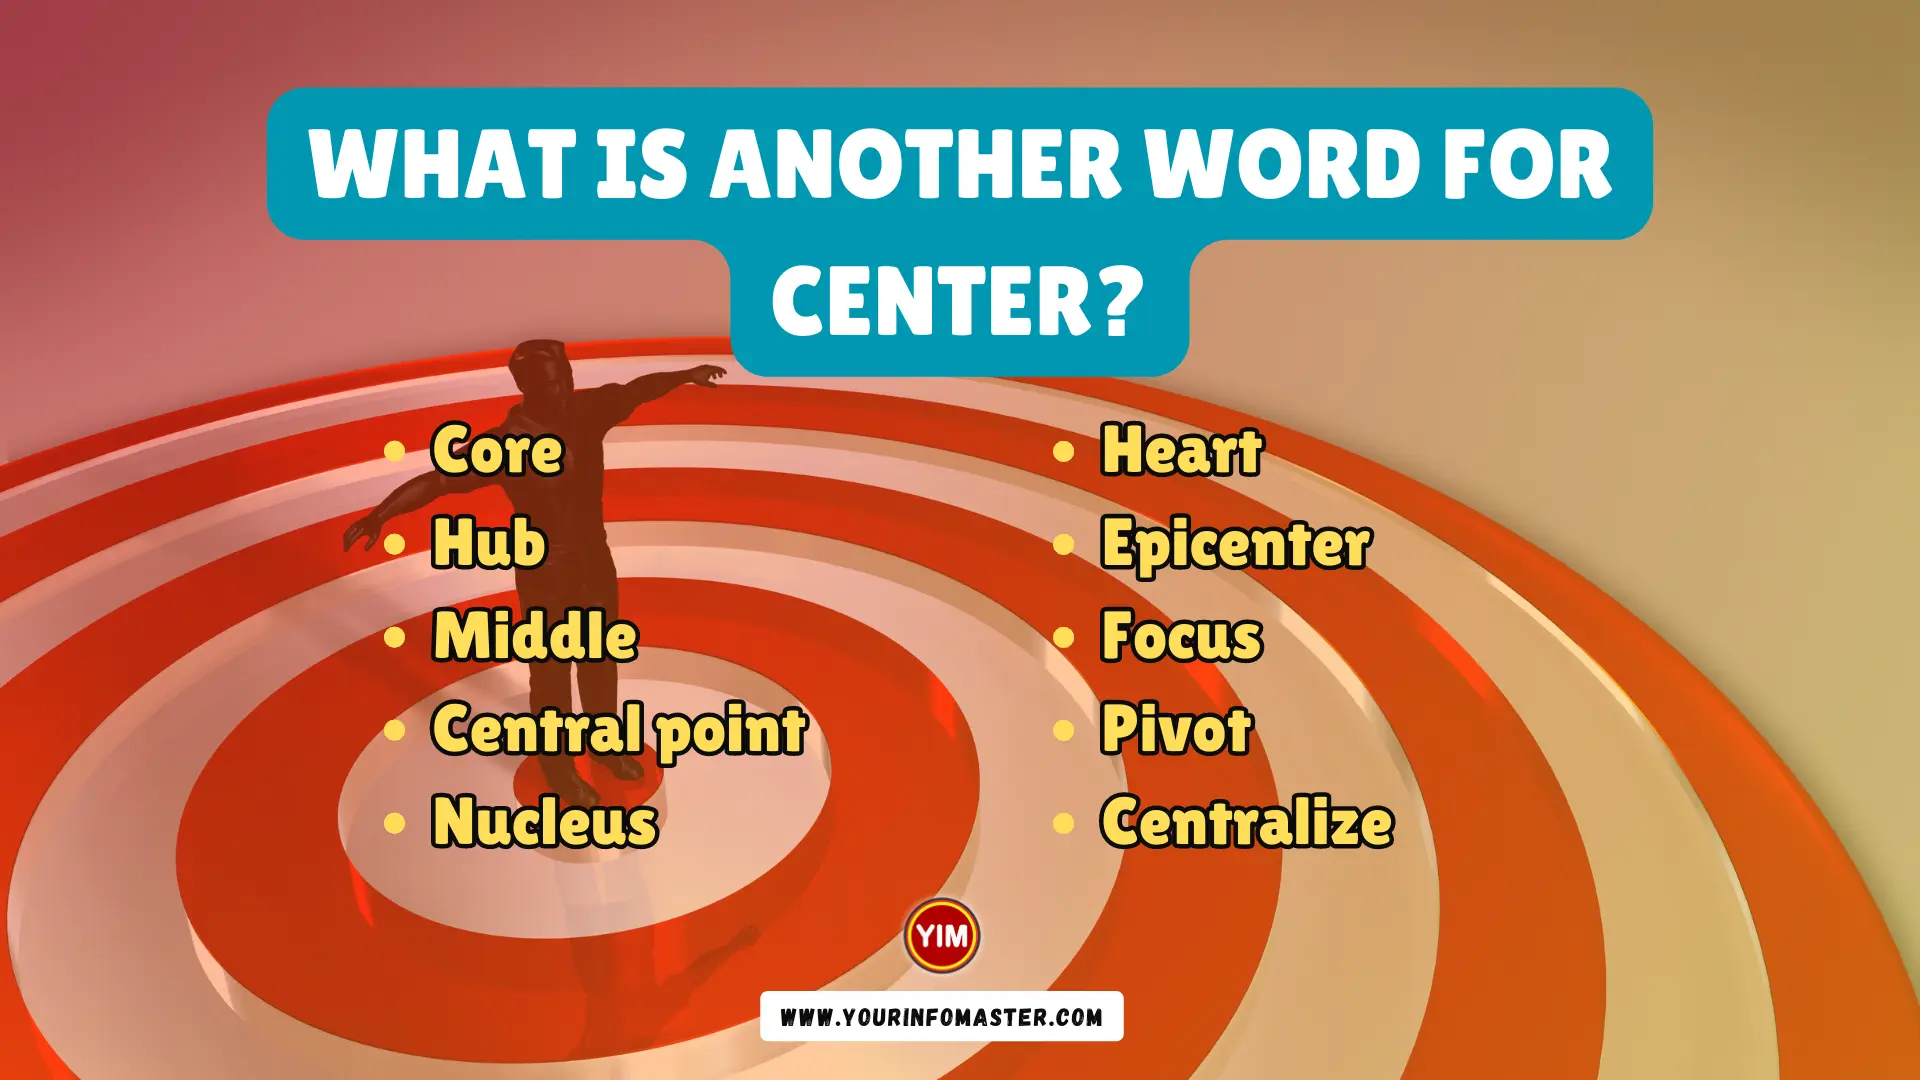 What is another word for Center